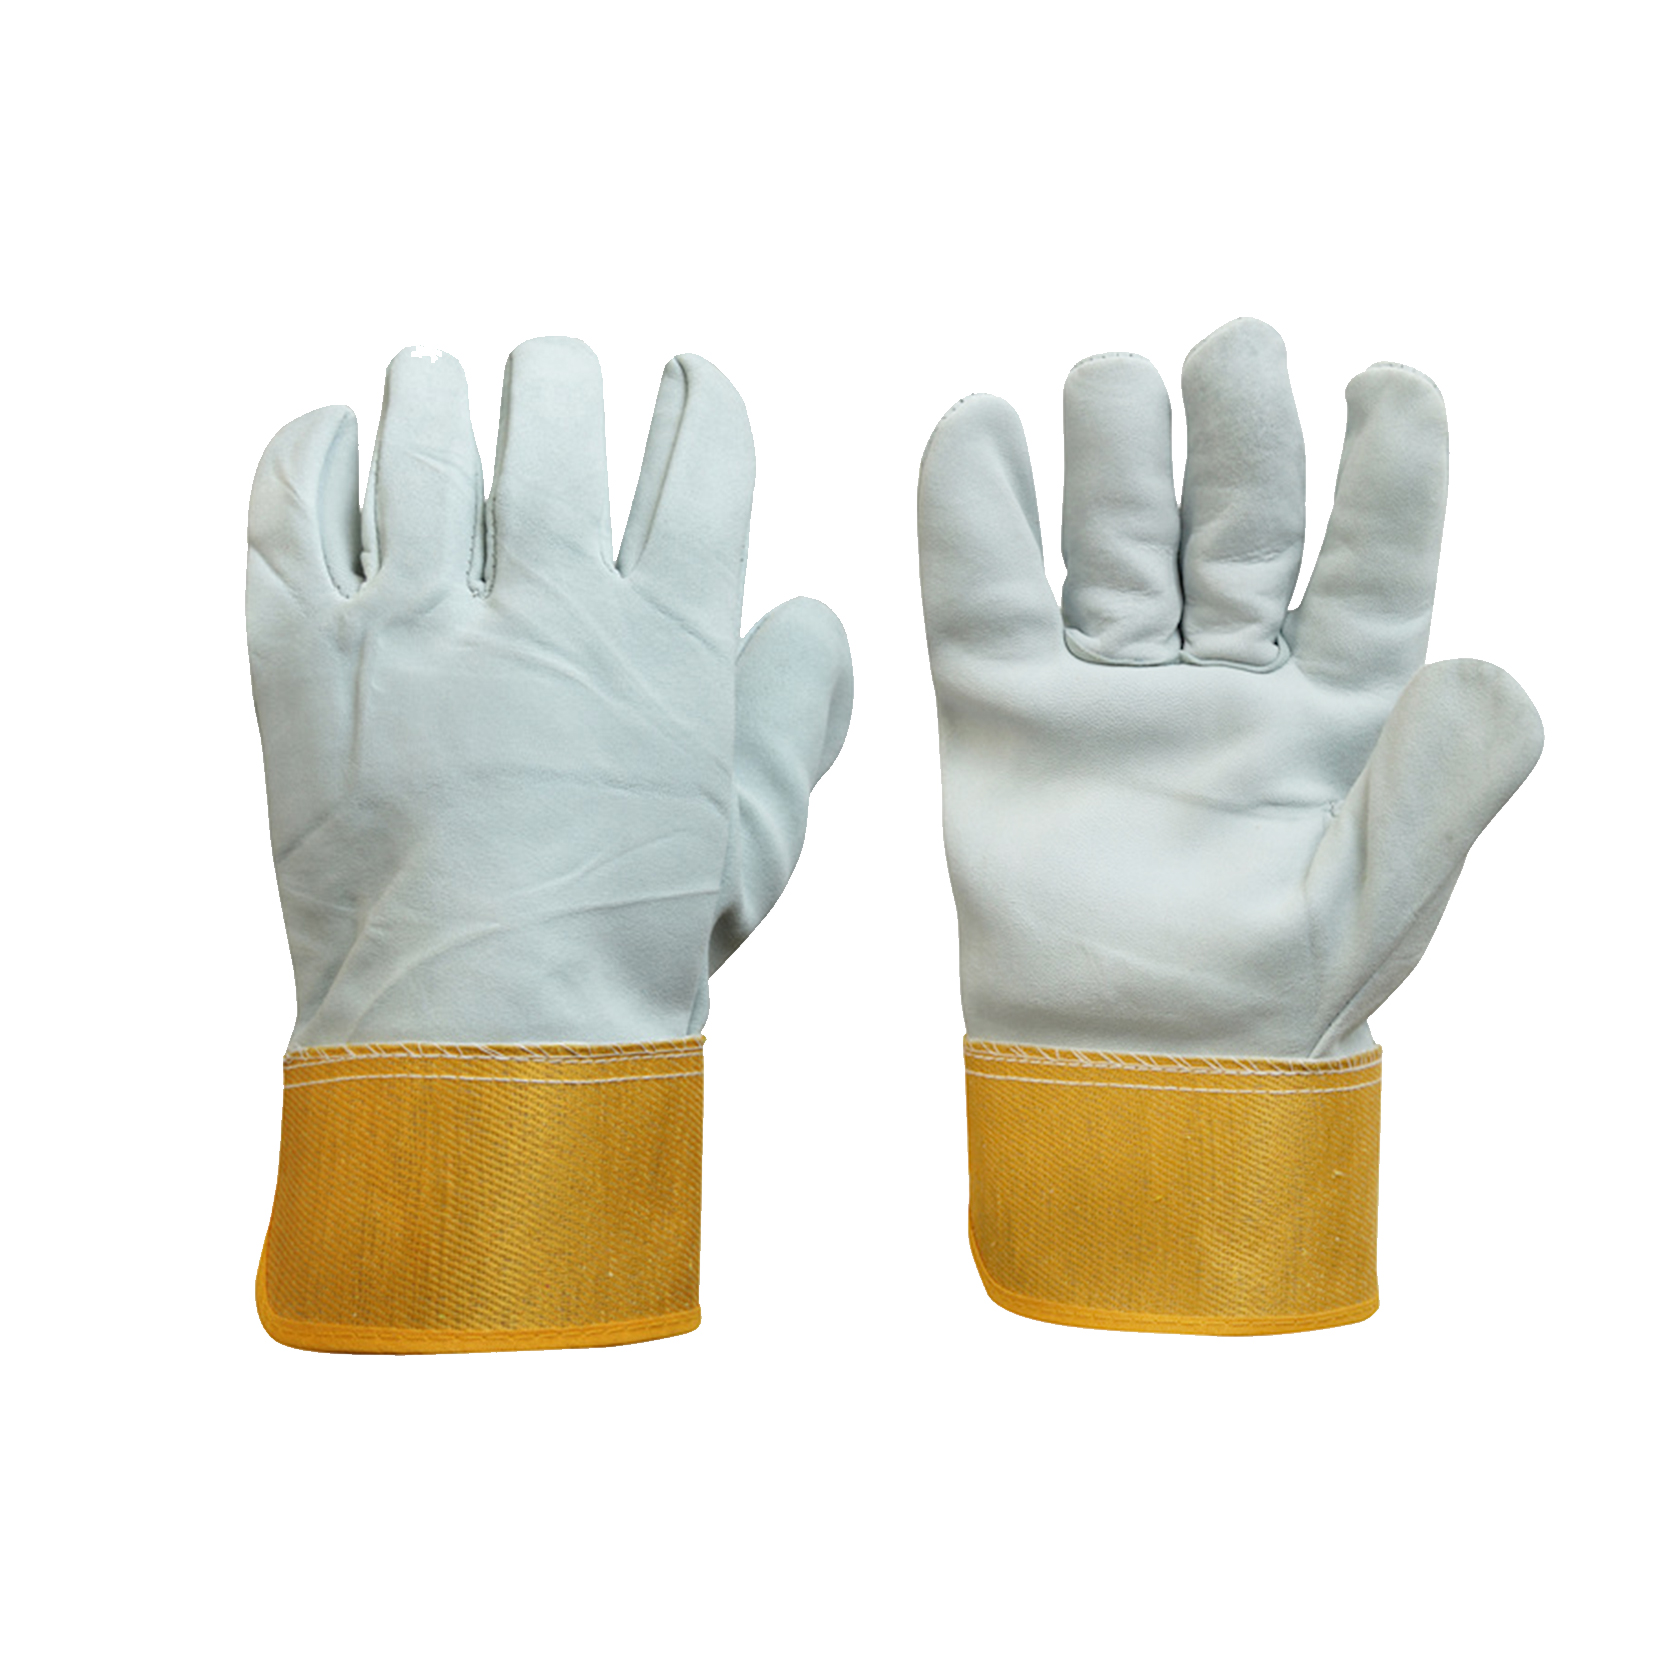 Cow Leather Work Gloves with Safety Cuff Welding Rigger Gloves